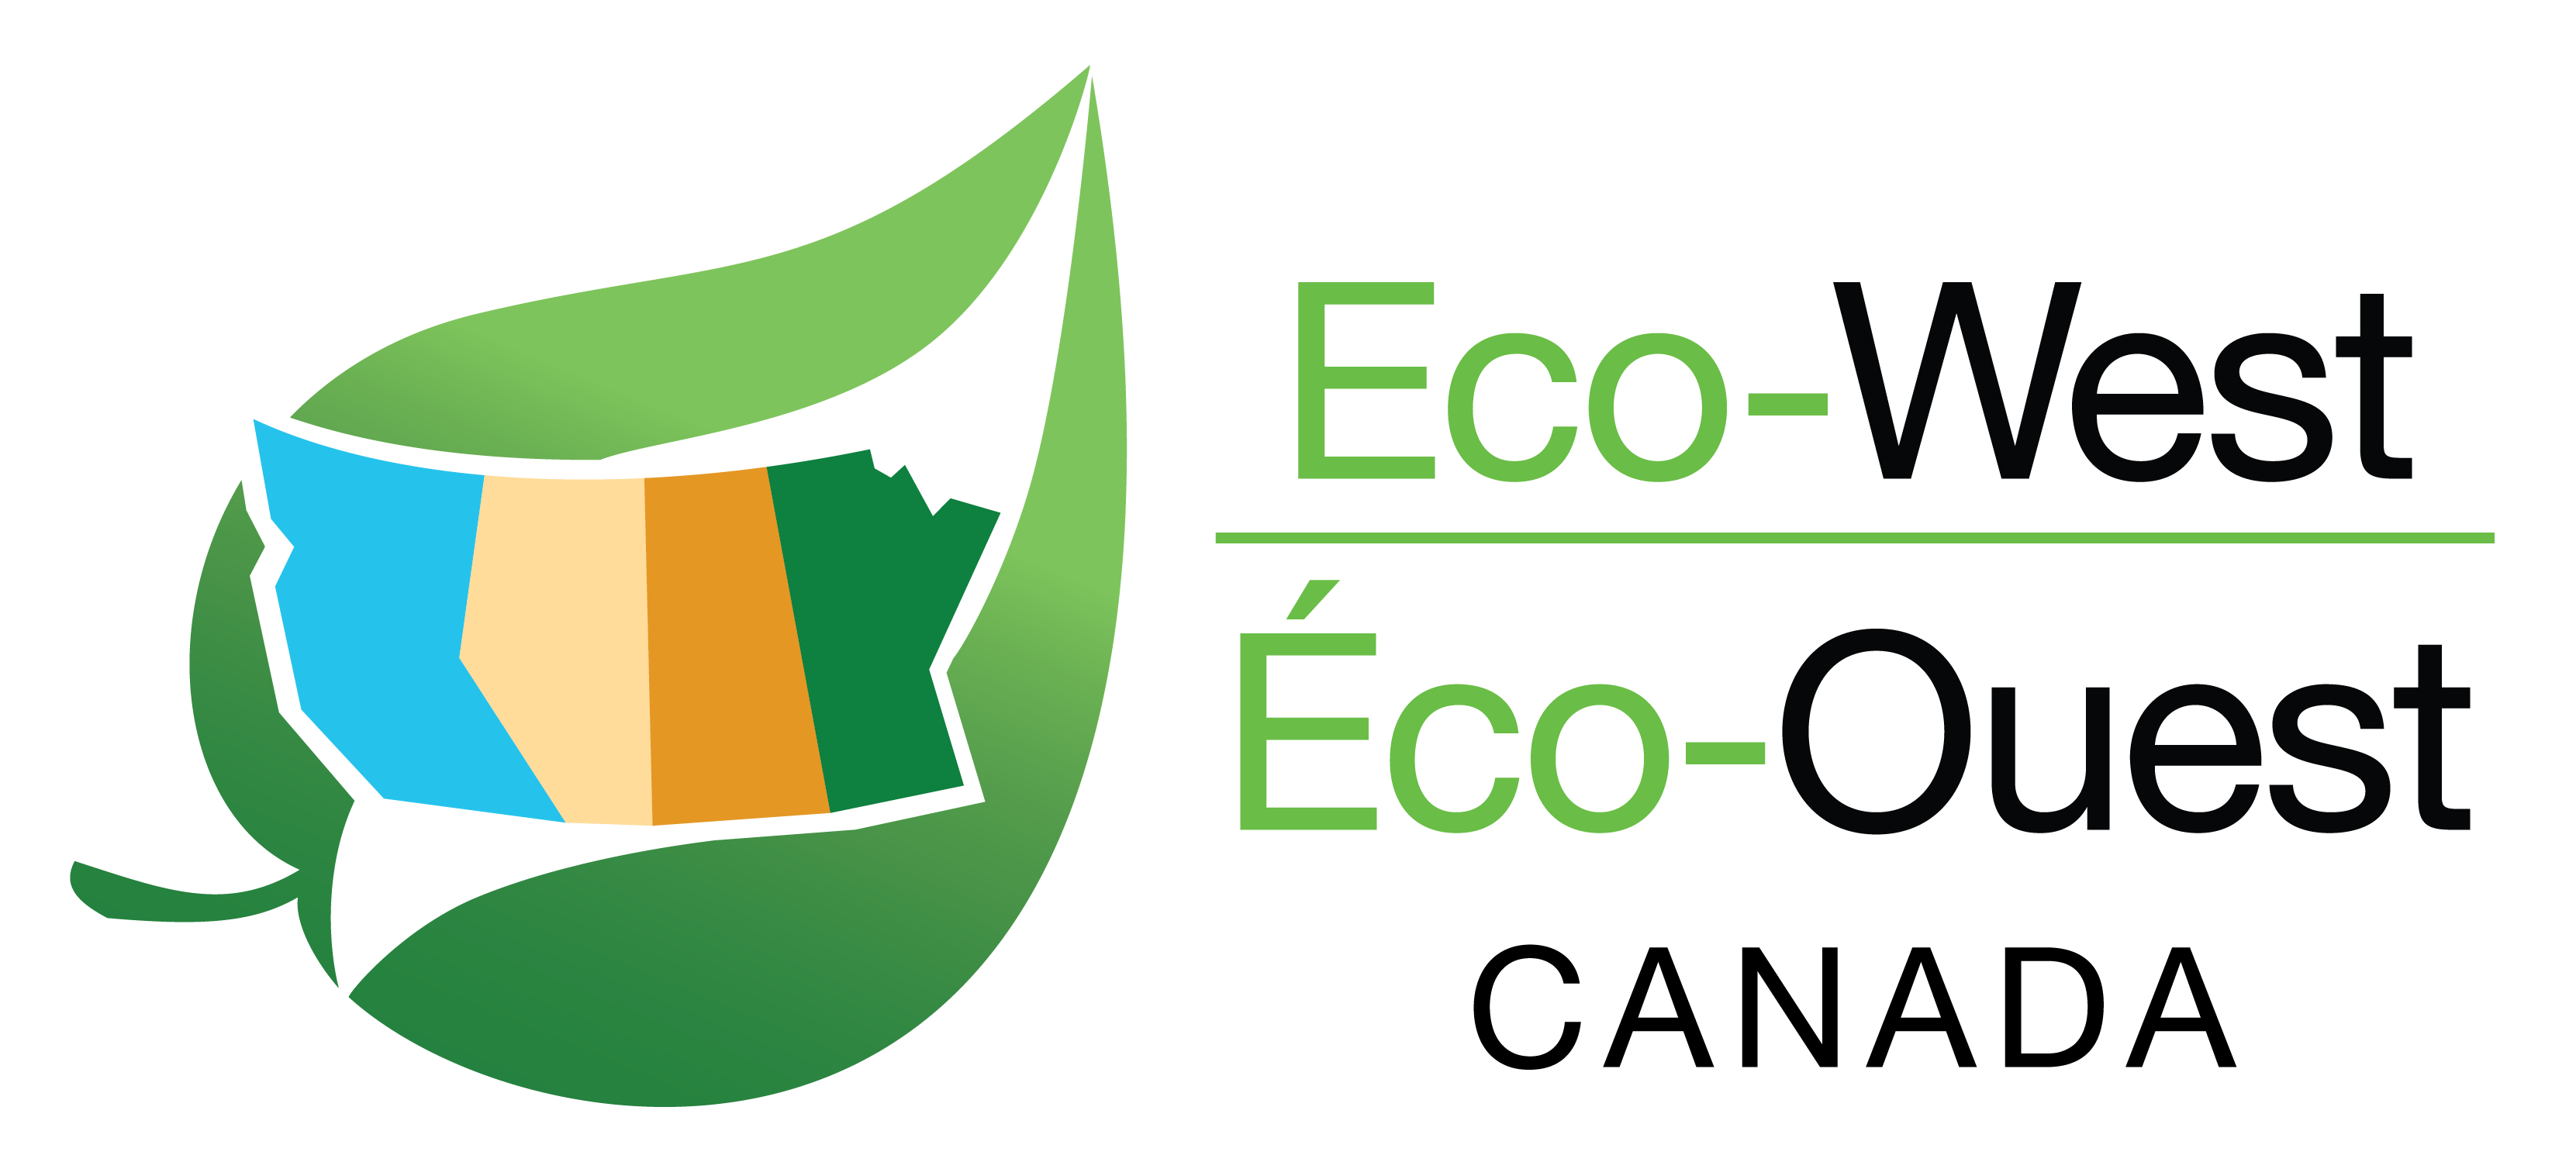 Eco-West|Eco-Ouest Canada